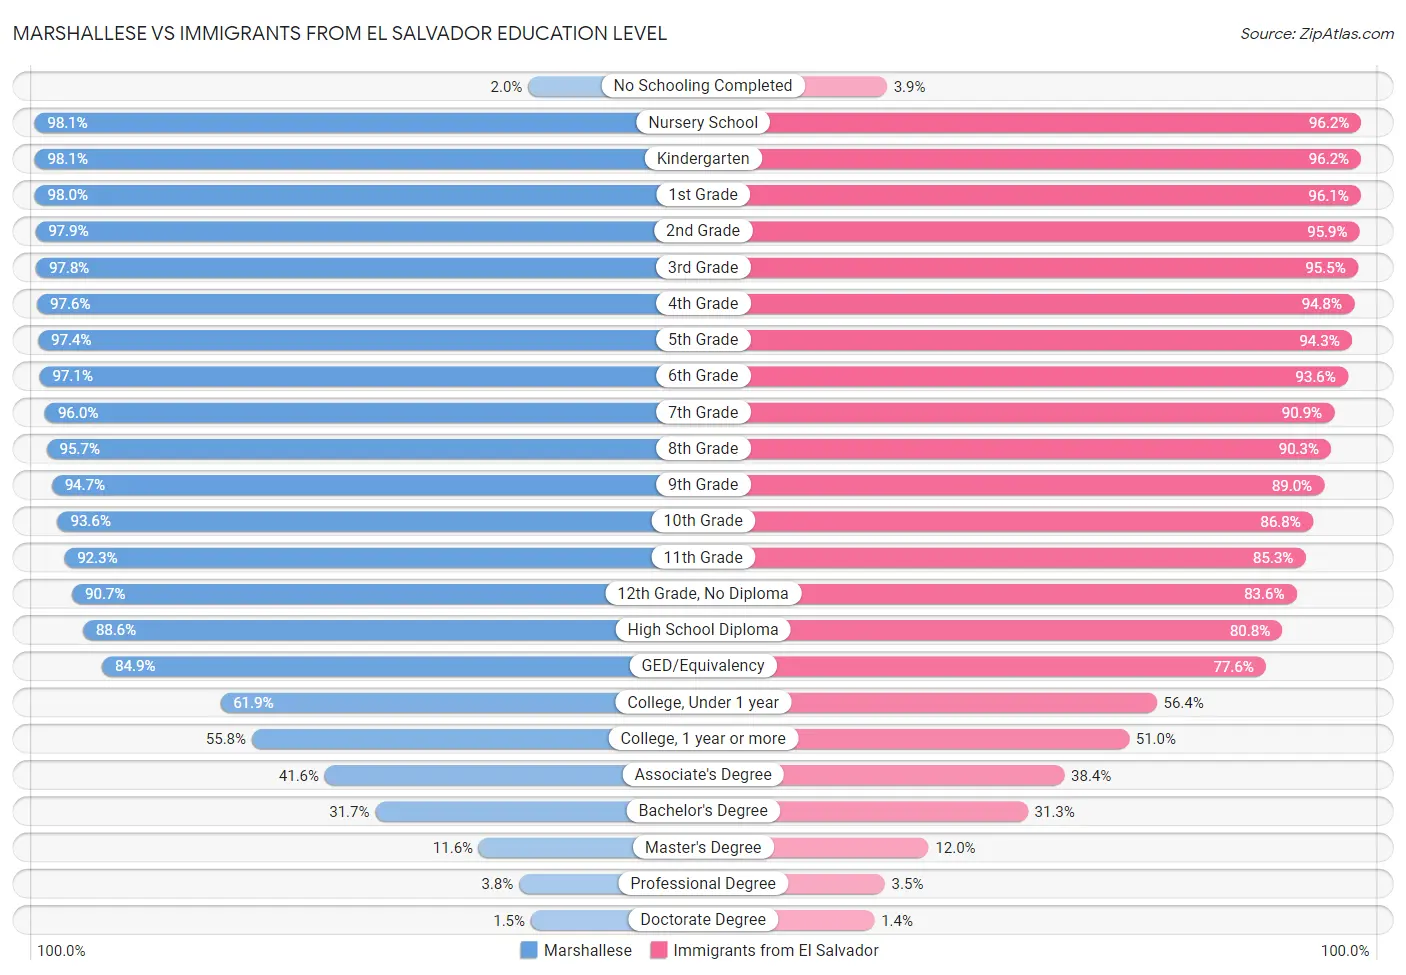 Marshallese vs Immigrants from El Salvador Education Level